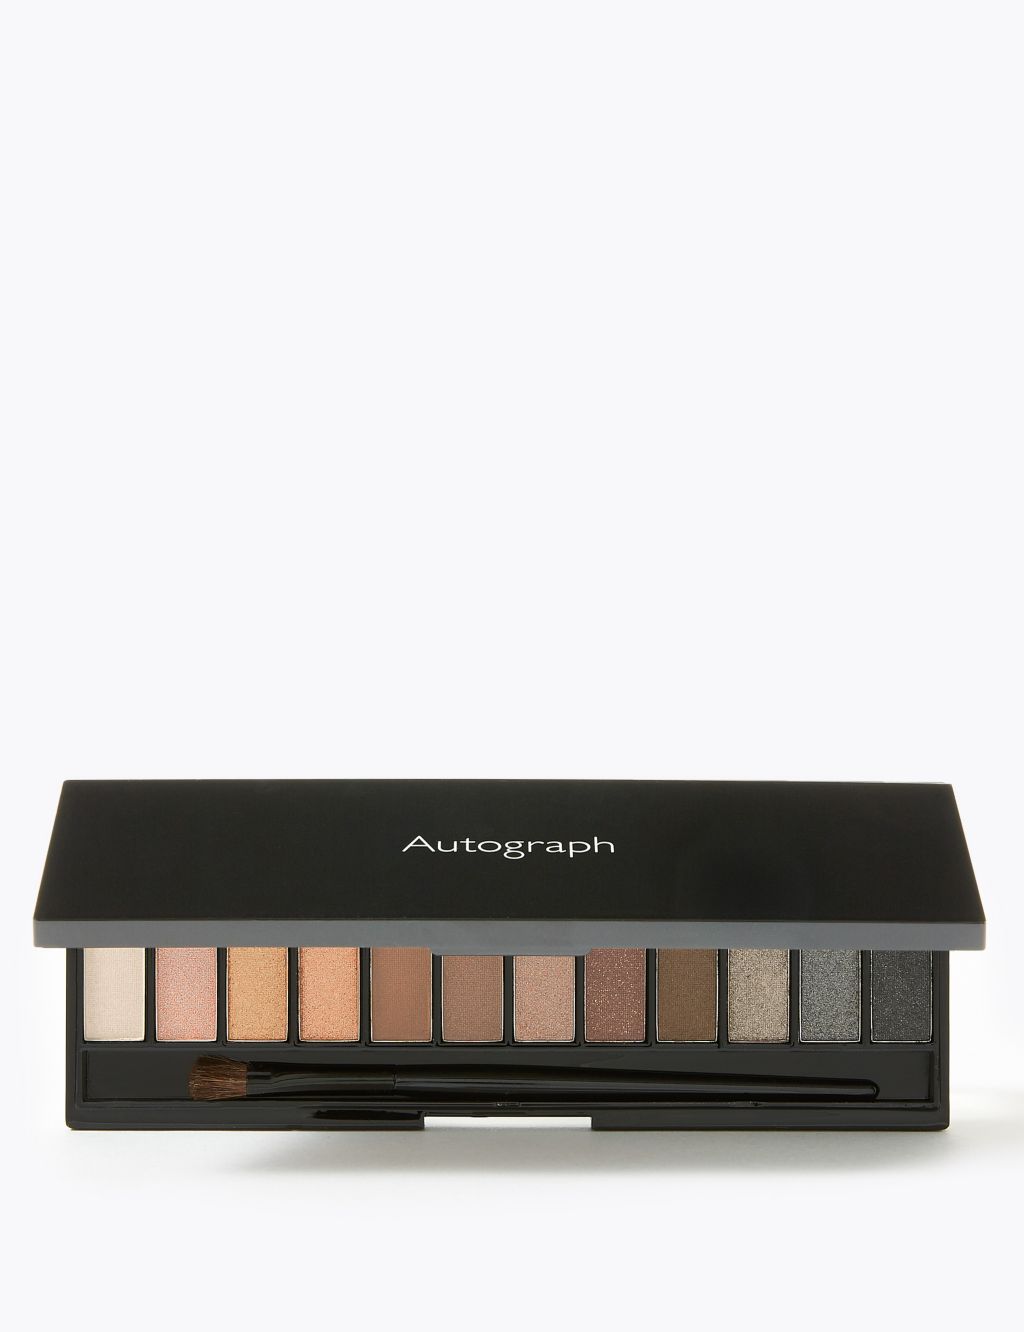 Lasting Colour Luxe Eyeshadow Palette image 1